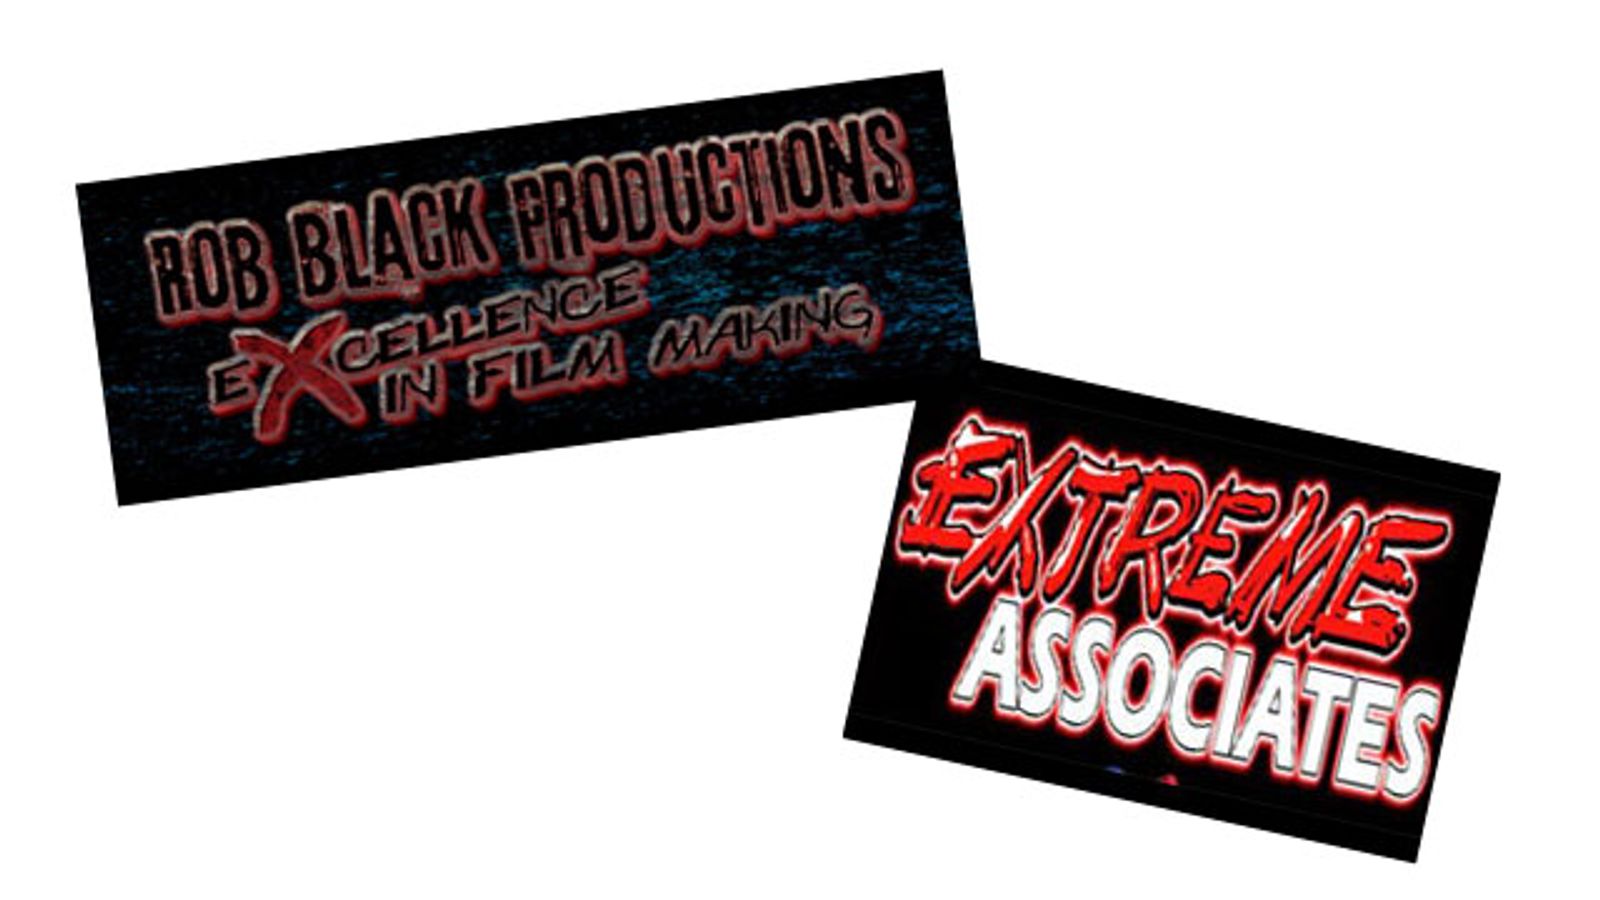 Rob Black Productions Offers 100 Extreme Associates Titles